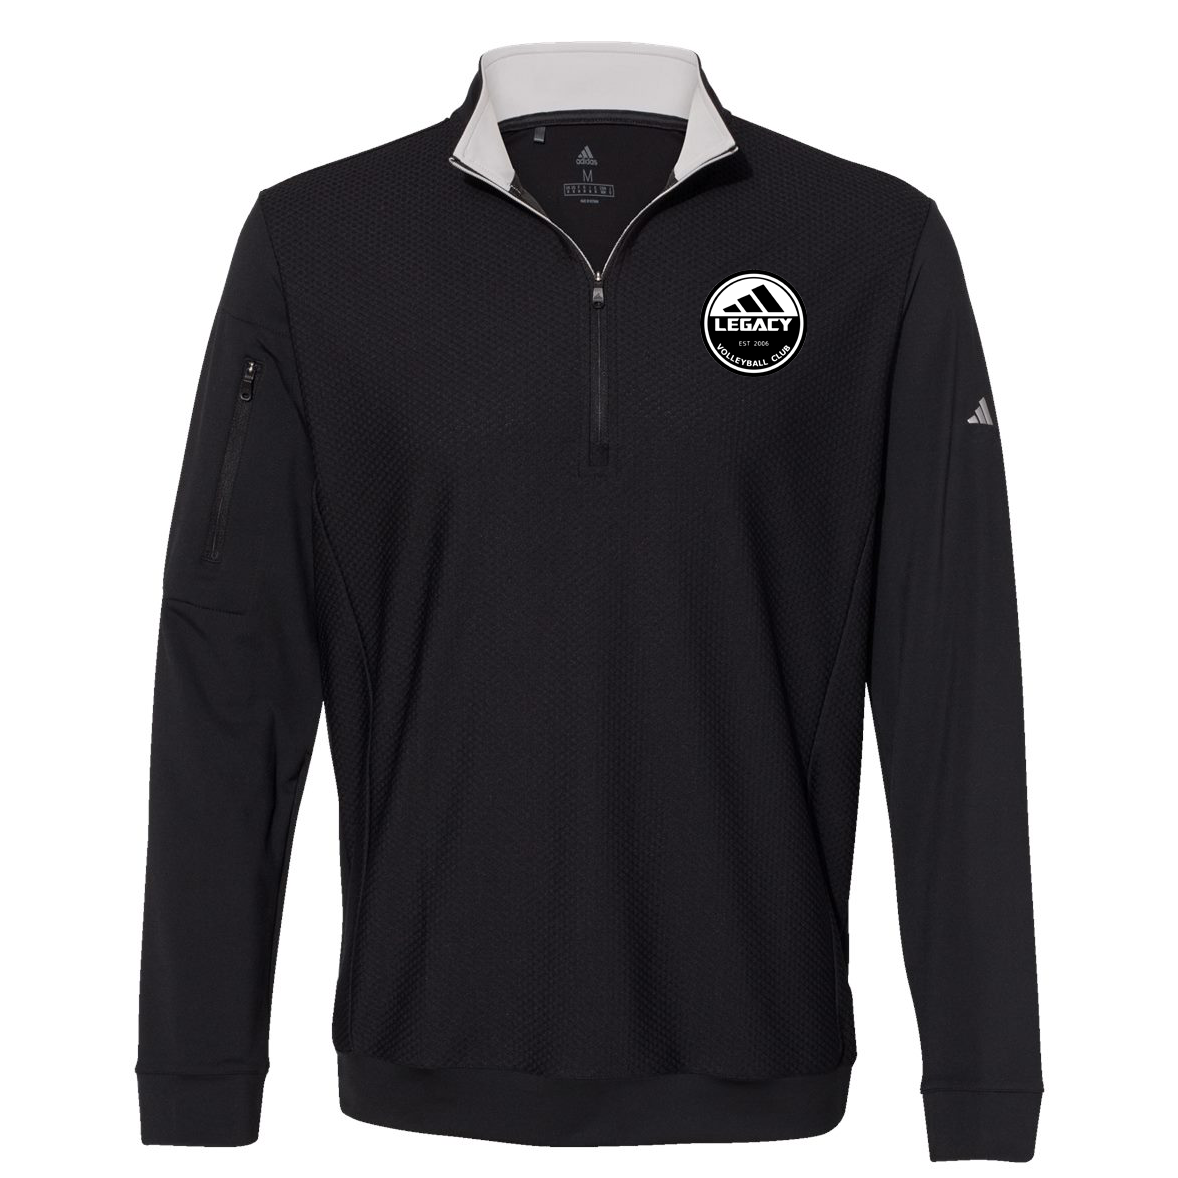 Legacy Volleyball Club Adidas Performance Textured Quarter-Zip Pullover